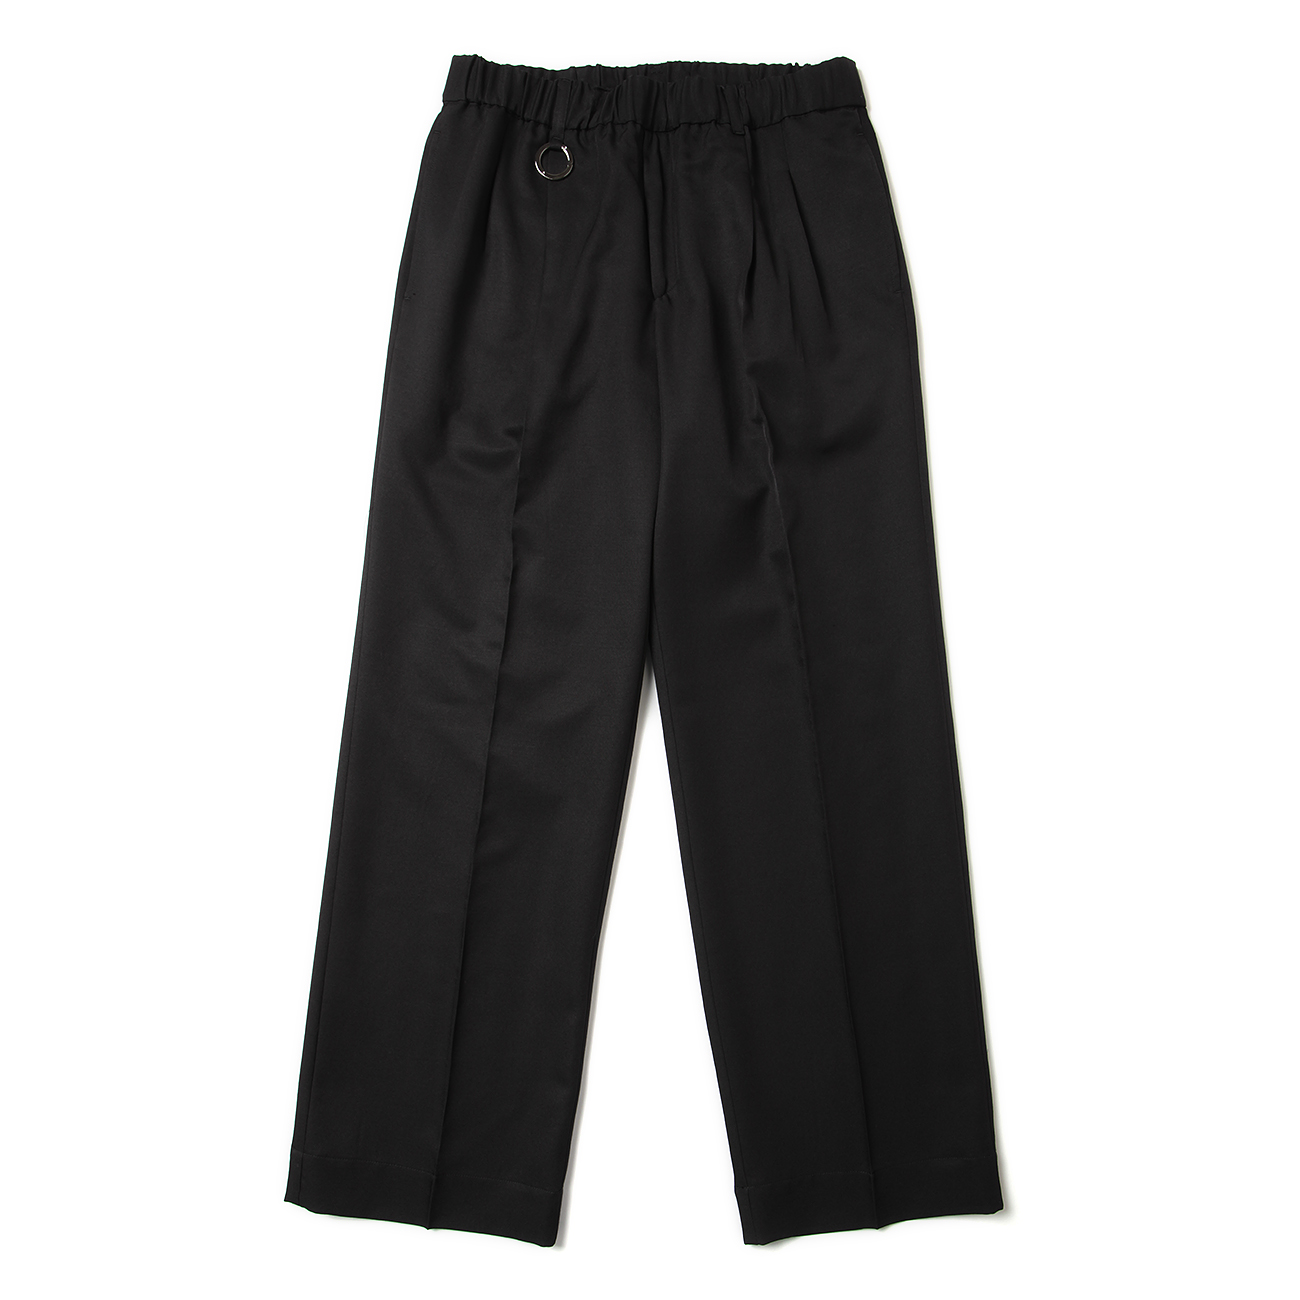 th products / ティーエイチプロダクツ | QUINN / Wide Tailored Pants